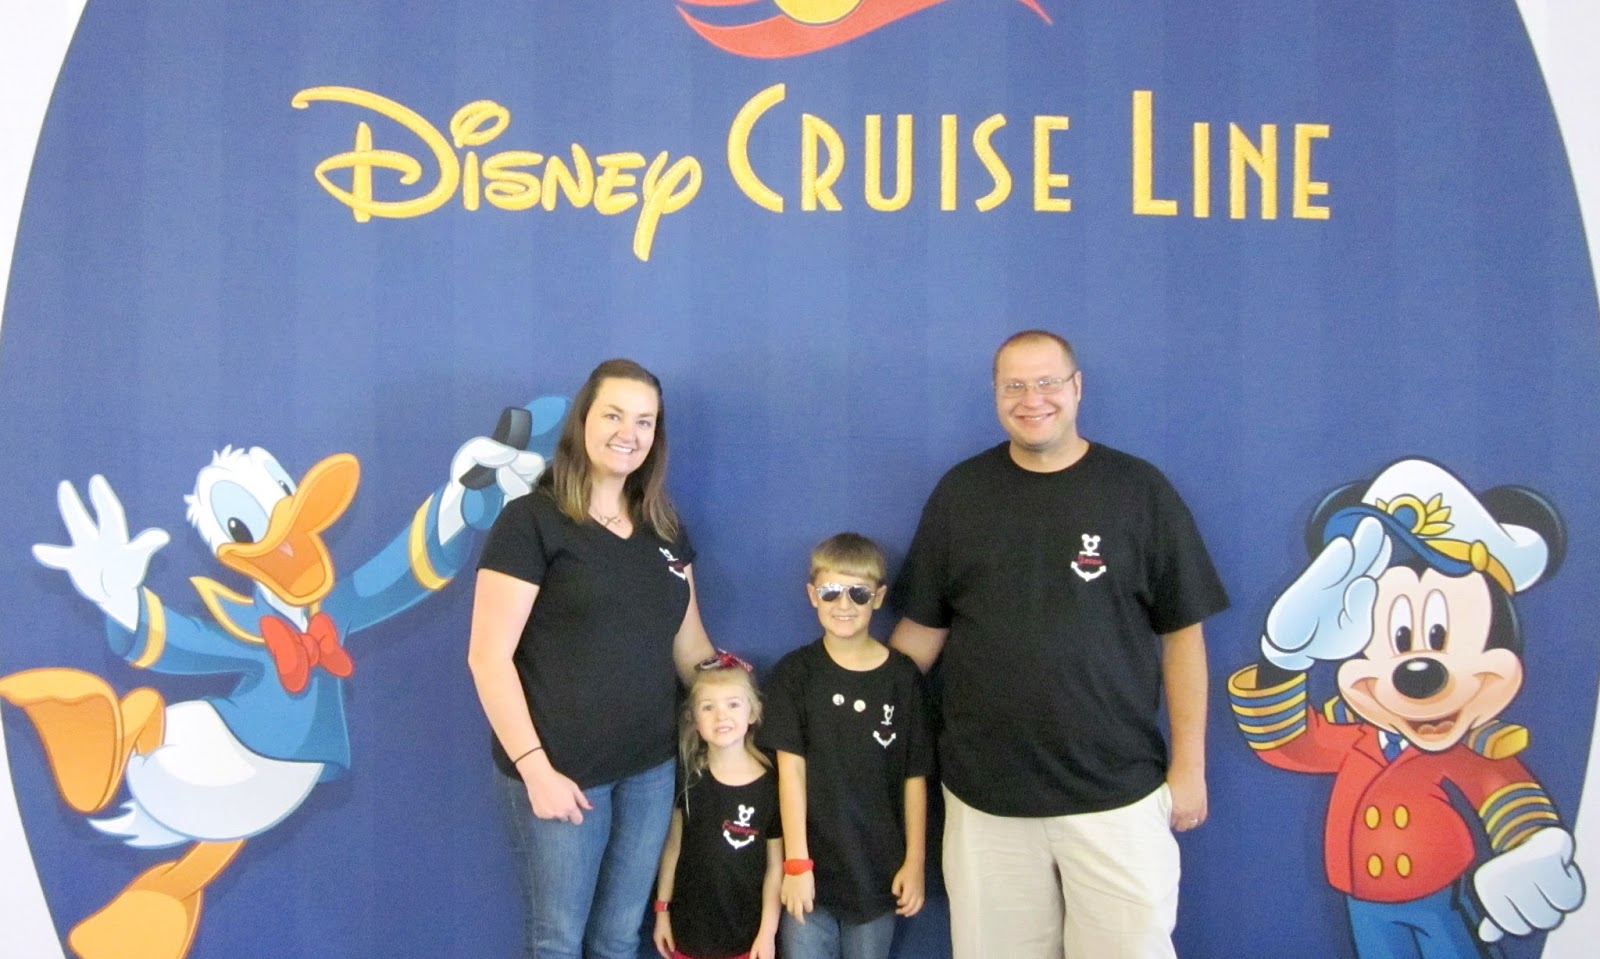 Tips for planning a Disney Cruise for First Timers, First time Disney Cruise Tips, Disney Cruise planning tips, how to save money on a Disney cruise, Disney Cruise Tips 2019, Disney Cruise tips and secrets, Disney Cruise Insider tips, 